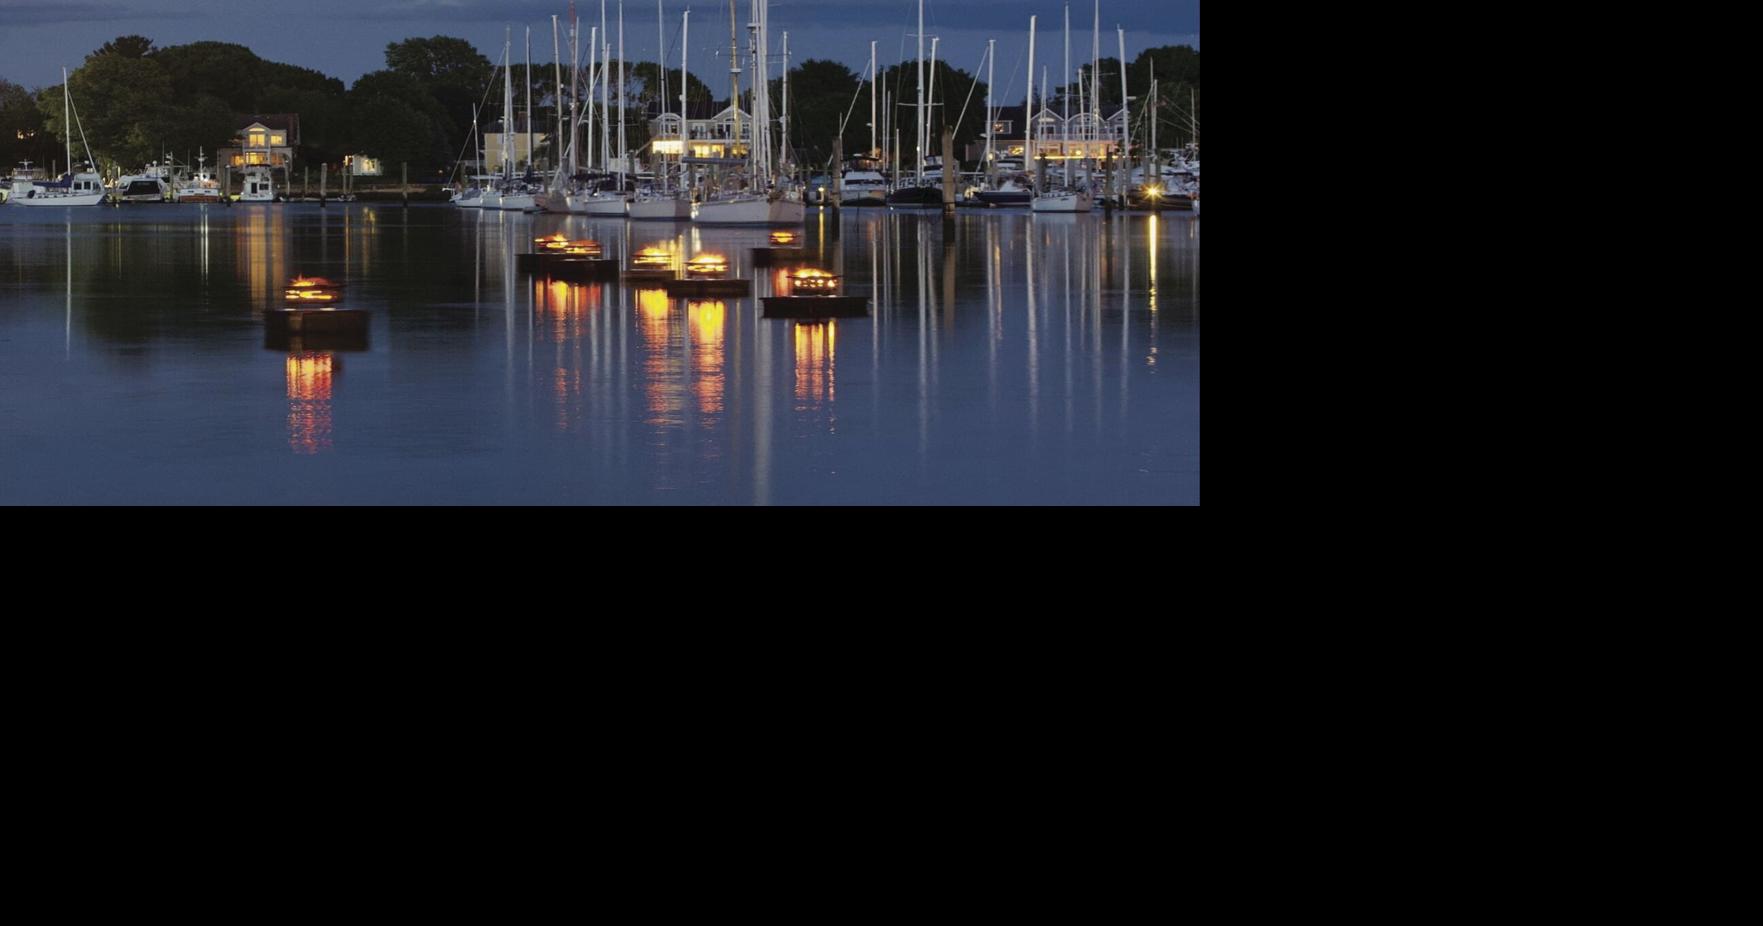 Wickford Harbor Lights show continues to evolve News